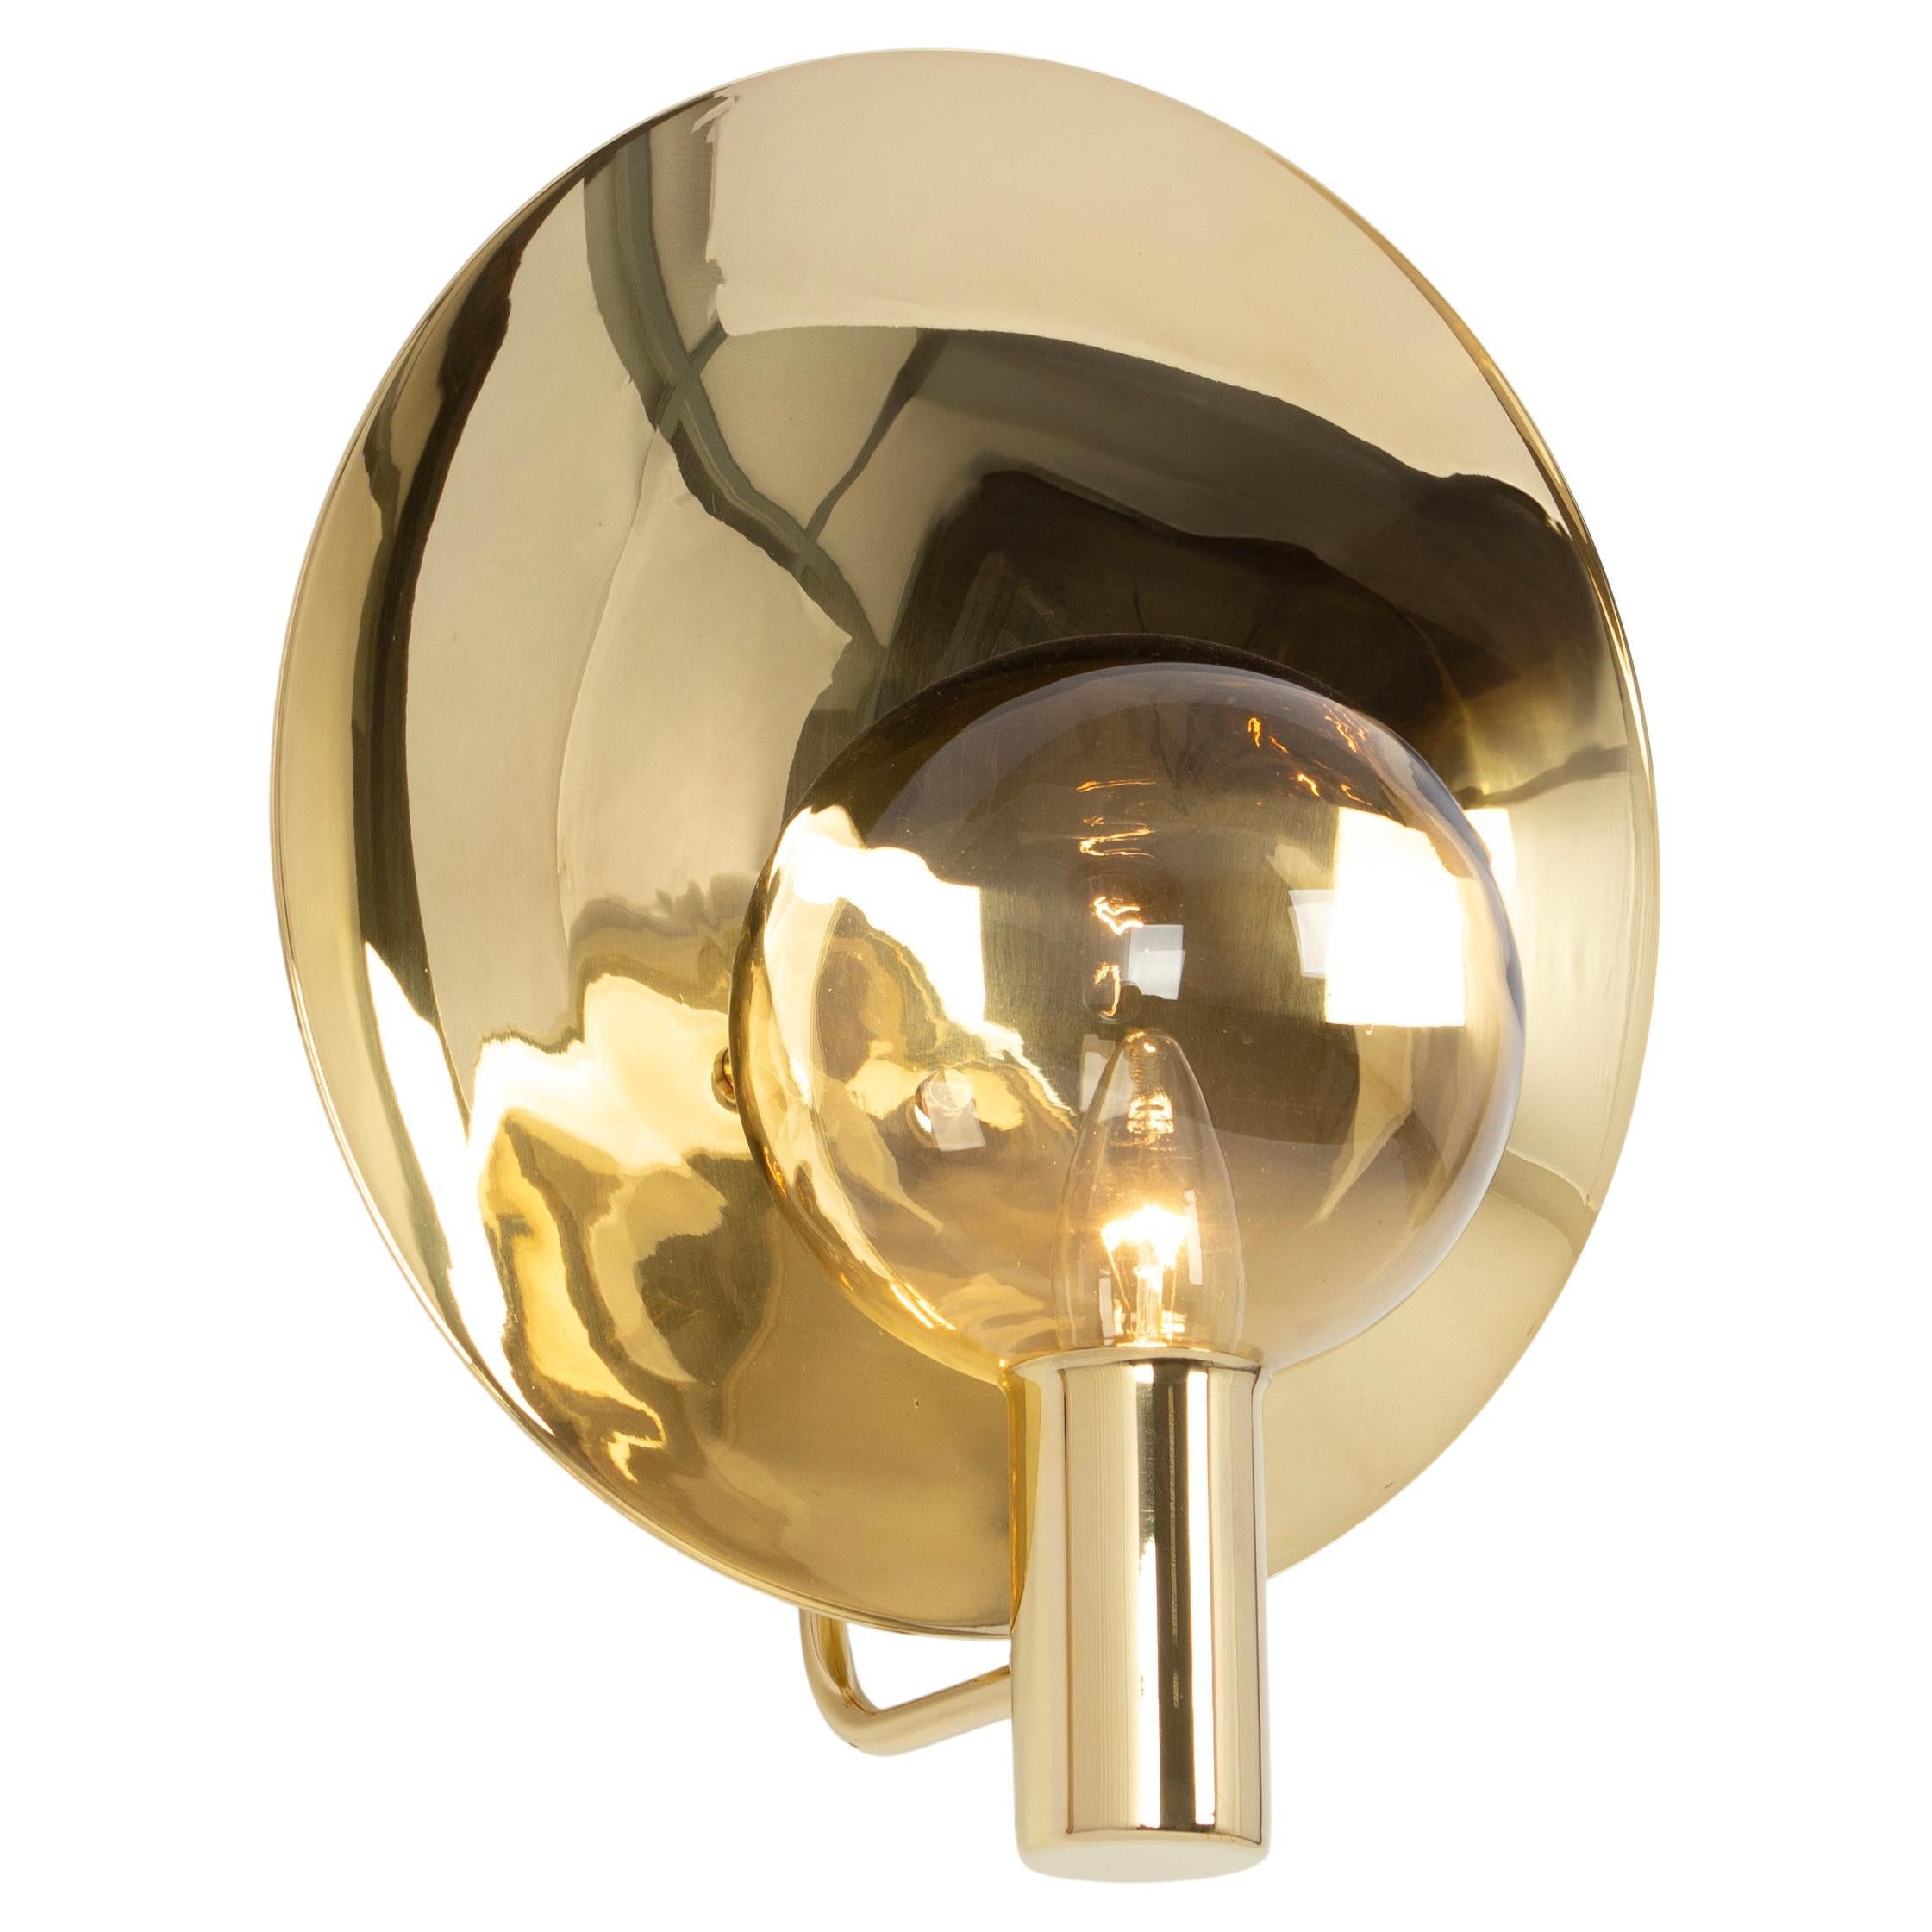 Stunning Large Brass and Smoke Glass Sconce, Hans Agne jakobsson, Sweden, 1970s For Sale